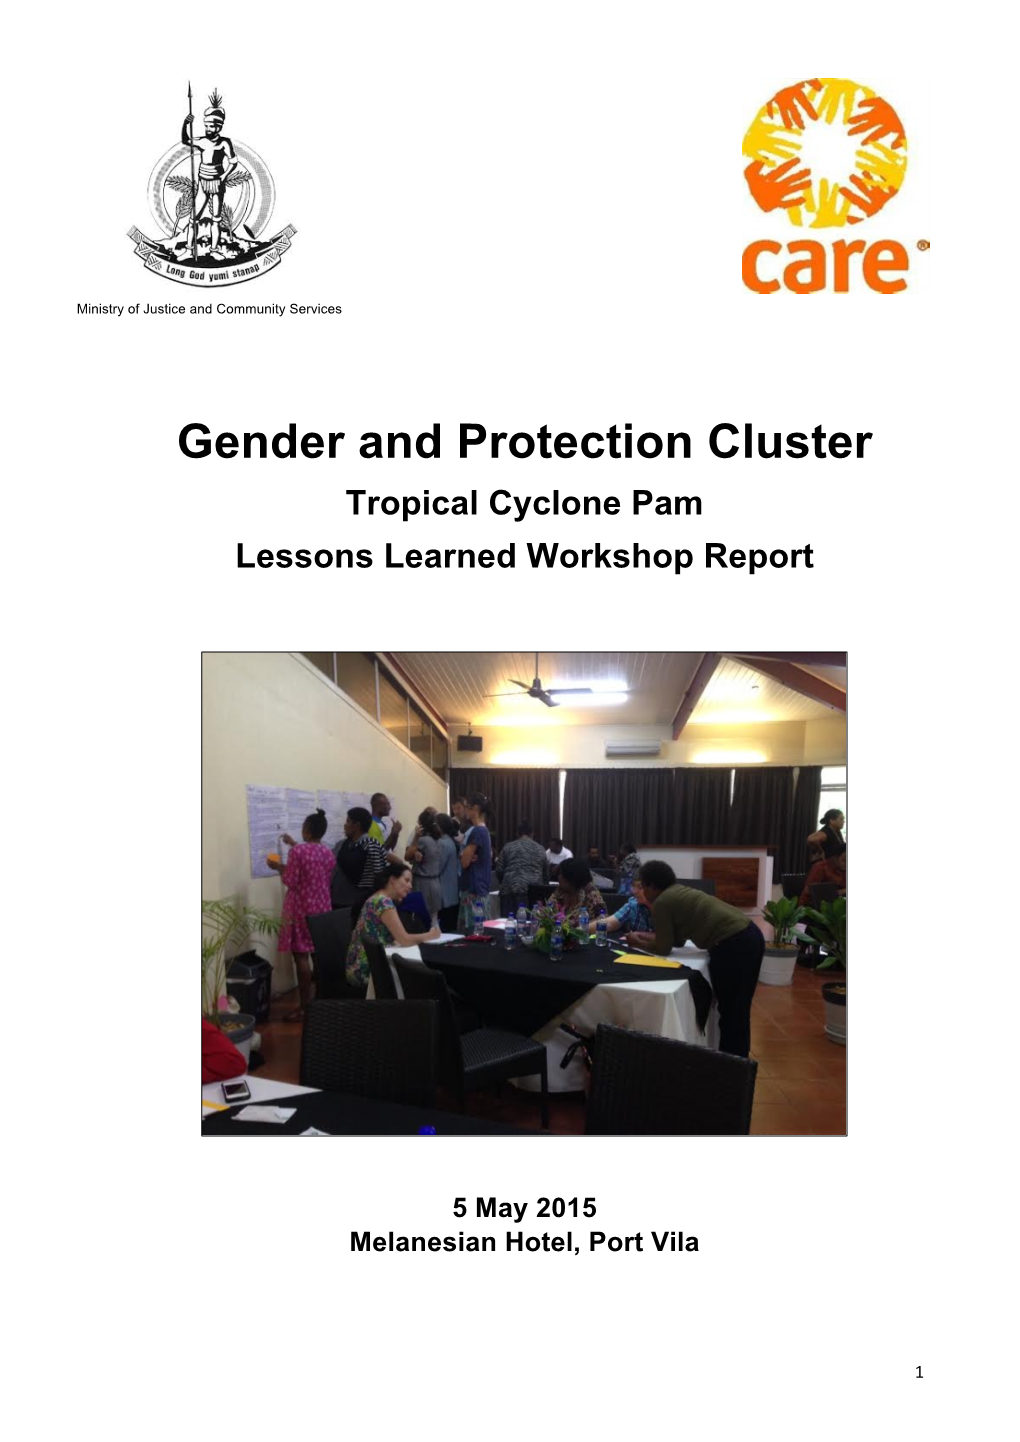 Gender and Protection Cluster Tropical Cyclone Pam Lessons Learned Workshop Report